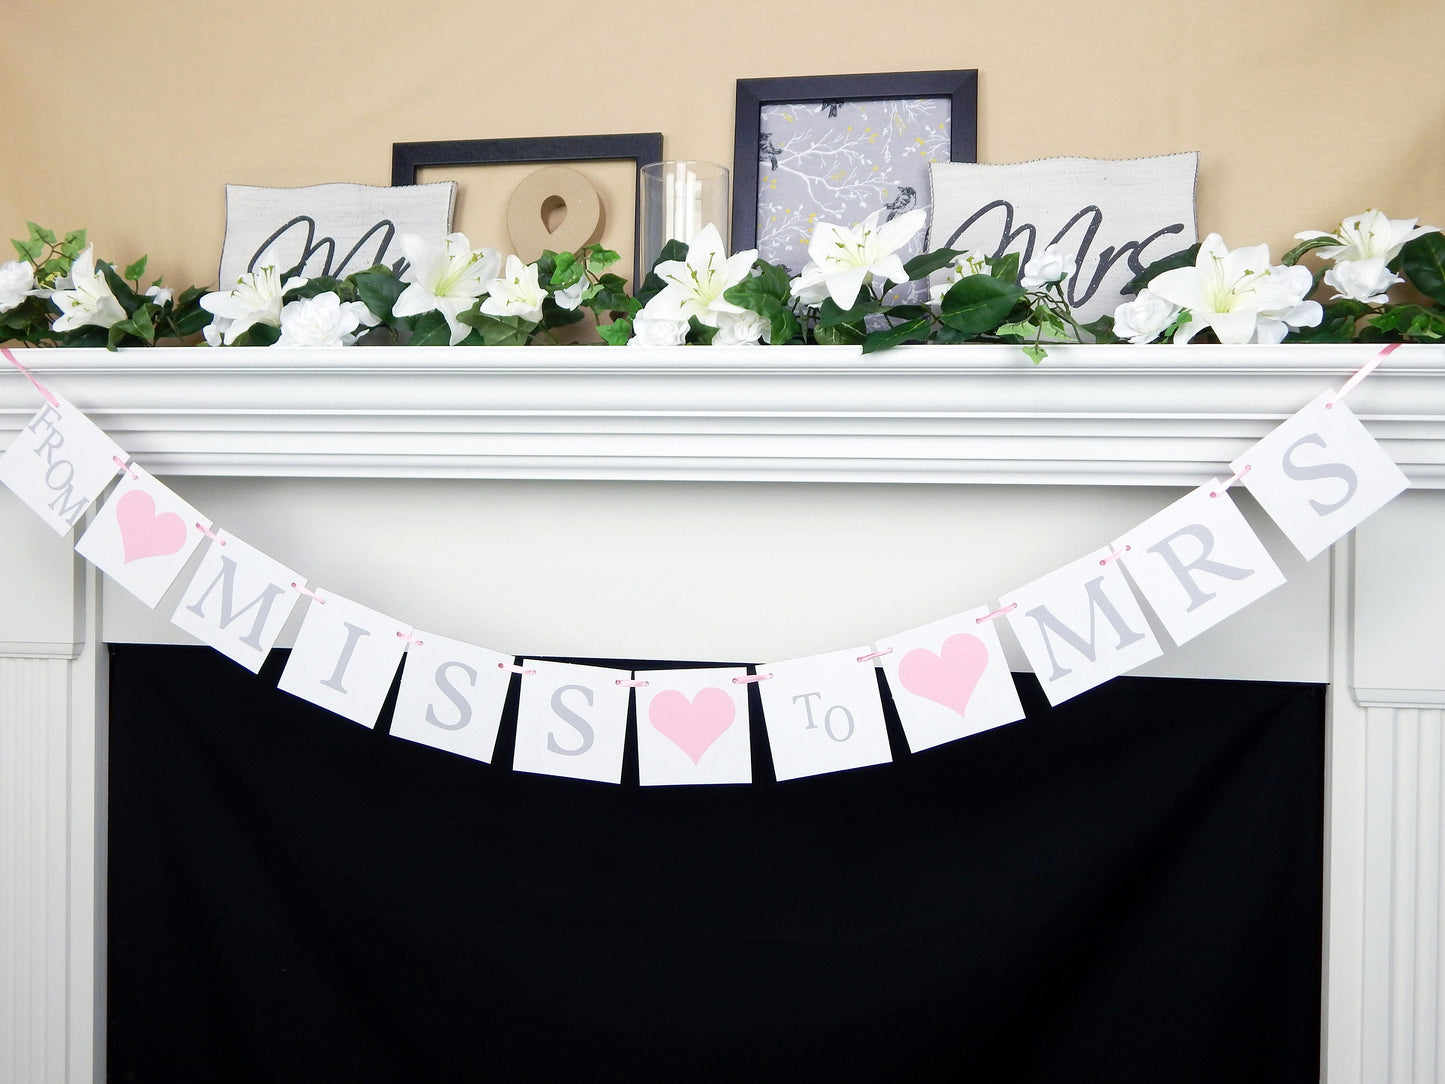 From Miss To Mrs banner, future mrs bunting, soon to be mrs bridal shower decorations, bachelorette party ideas, pink bride to be garland